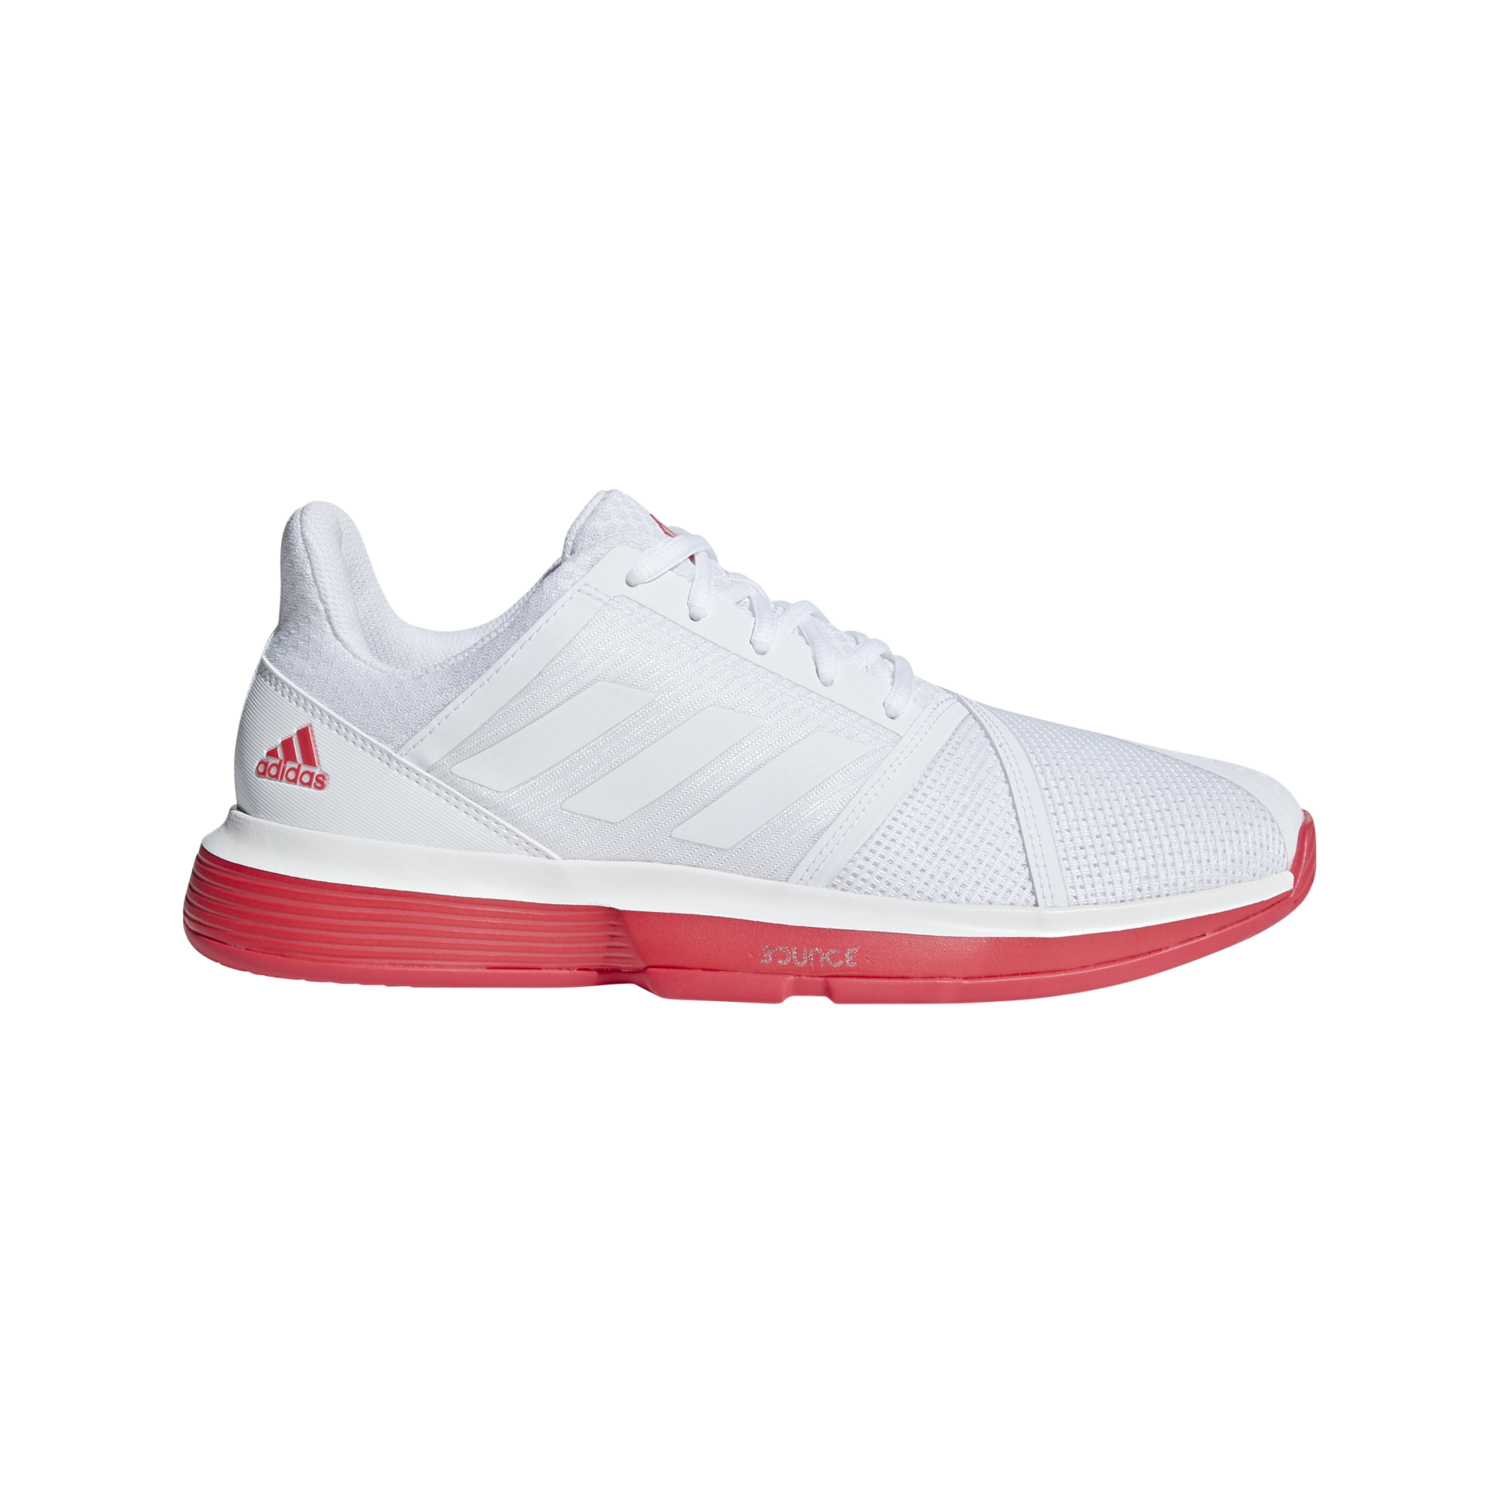 adidas red tennis shoes